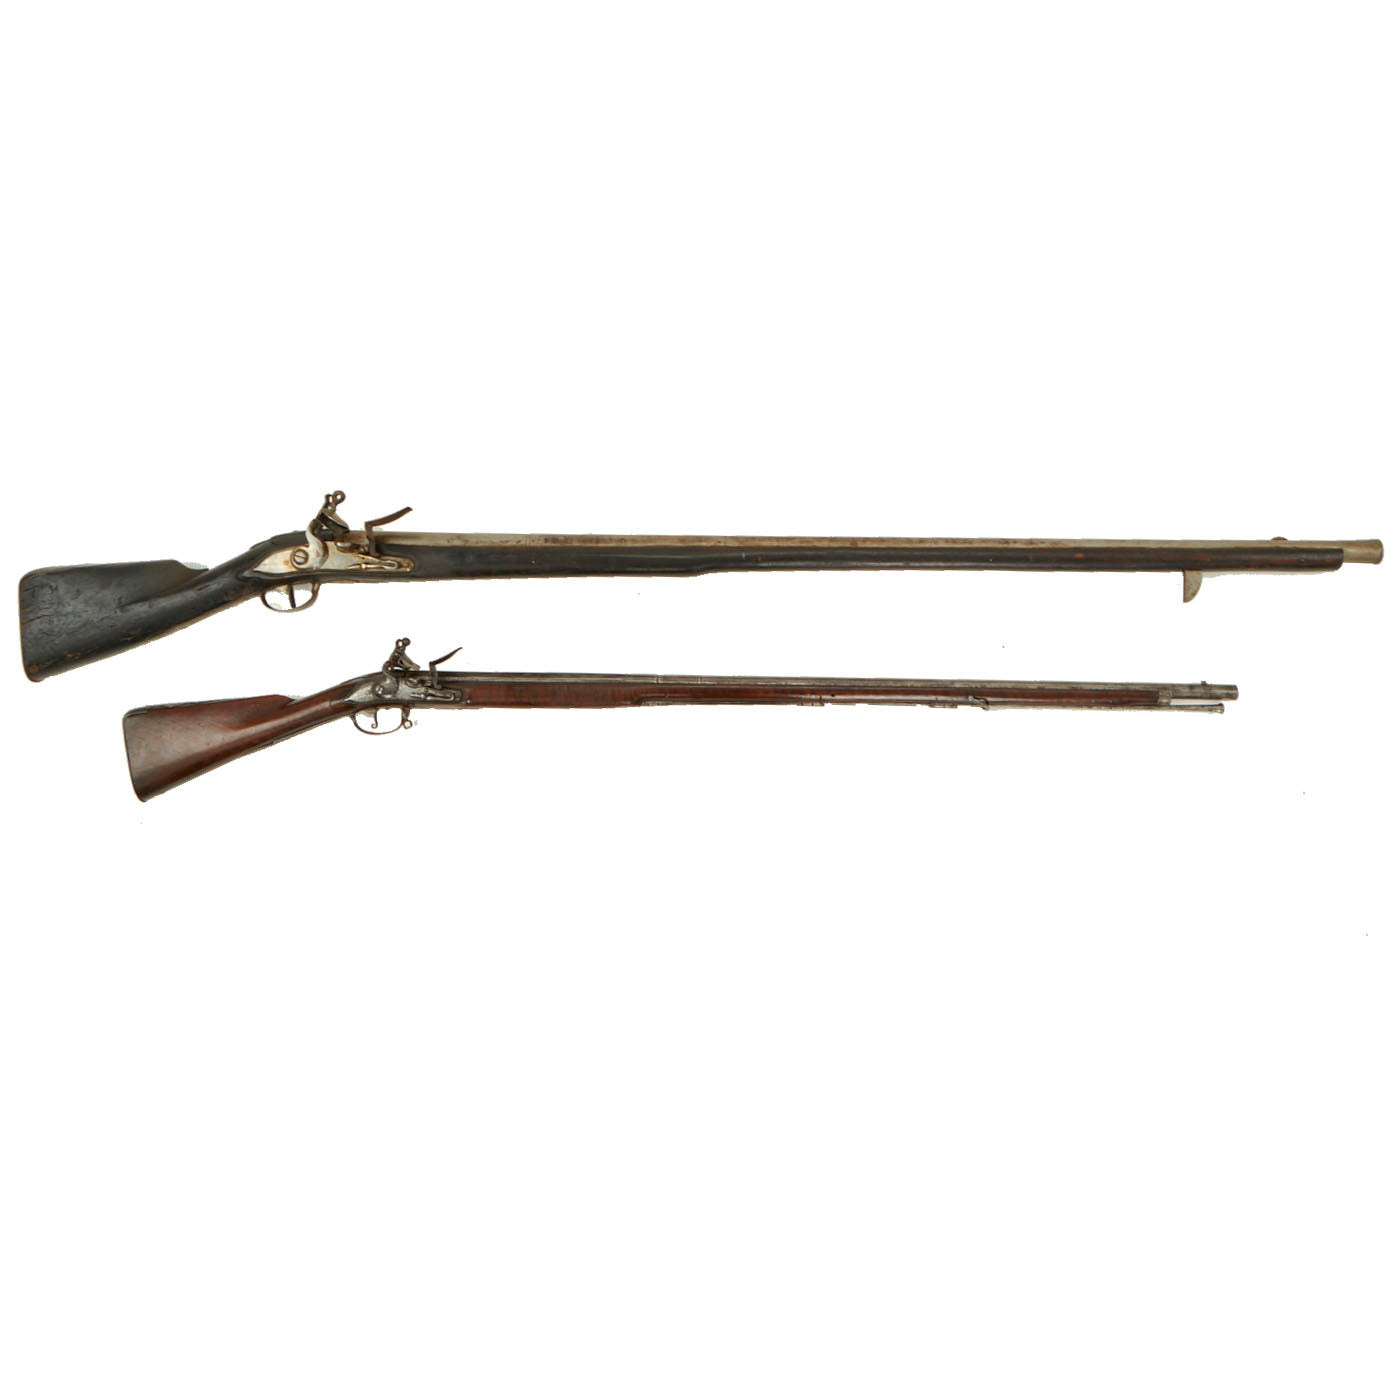 VARIOUS ASSORTMENT OF OLD ANTIQUE ACCESSORIES FOR A FLINTLOCK AND